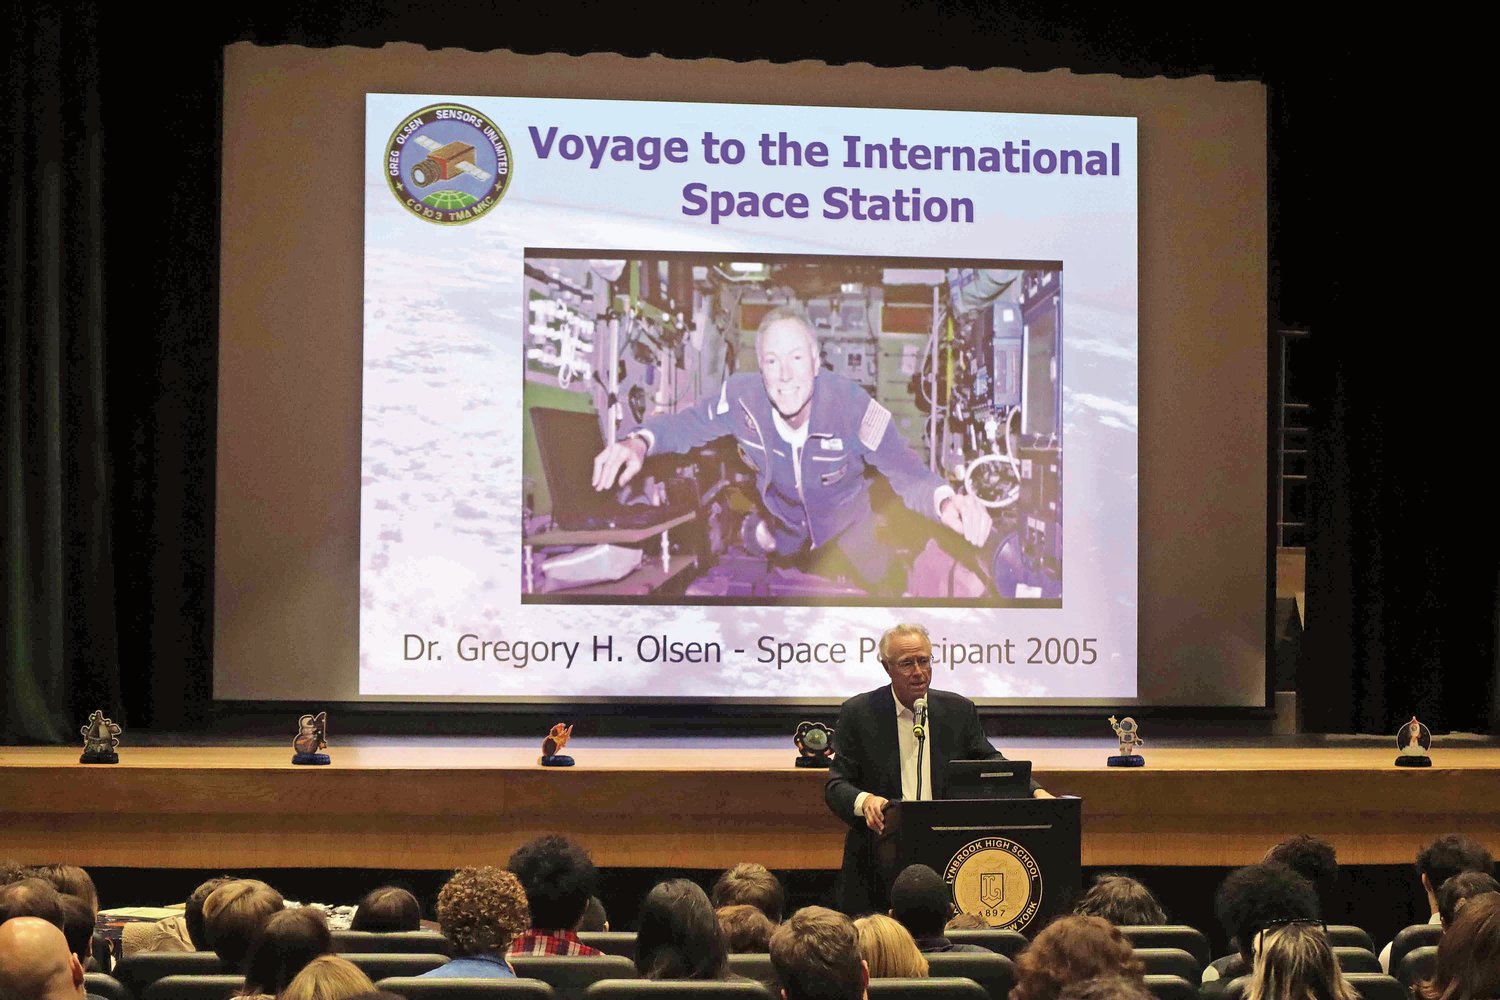 Greg Olsen, who logged almost 4 million miles of weightless travel while aboard the International Space Station in 2005, was a keynote speaker at the symposium.